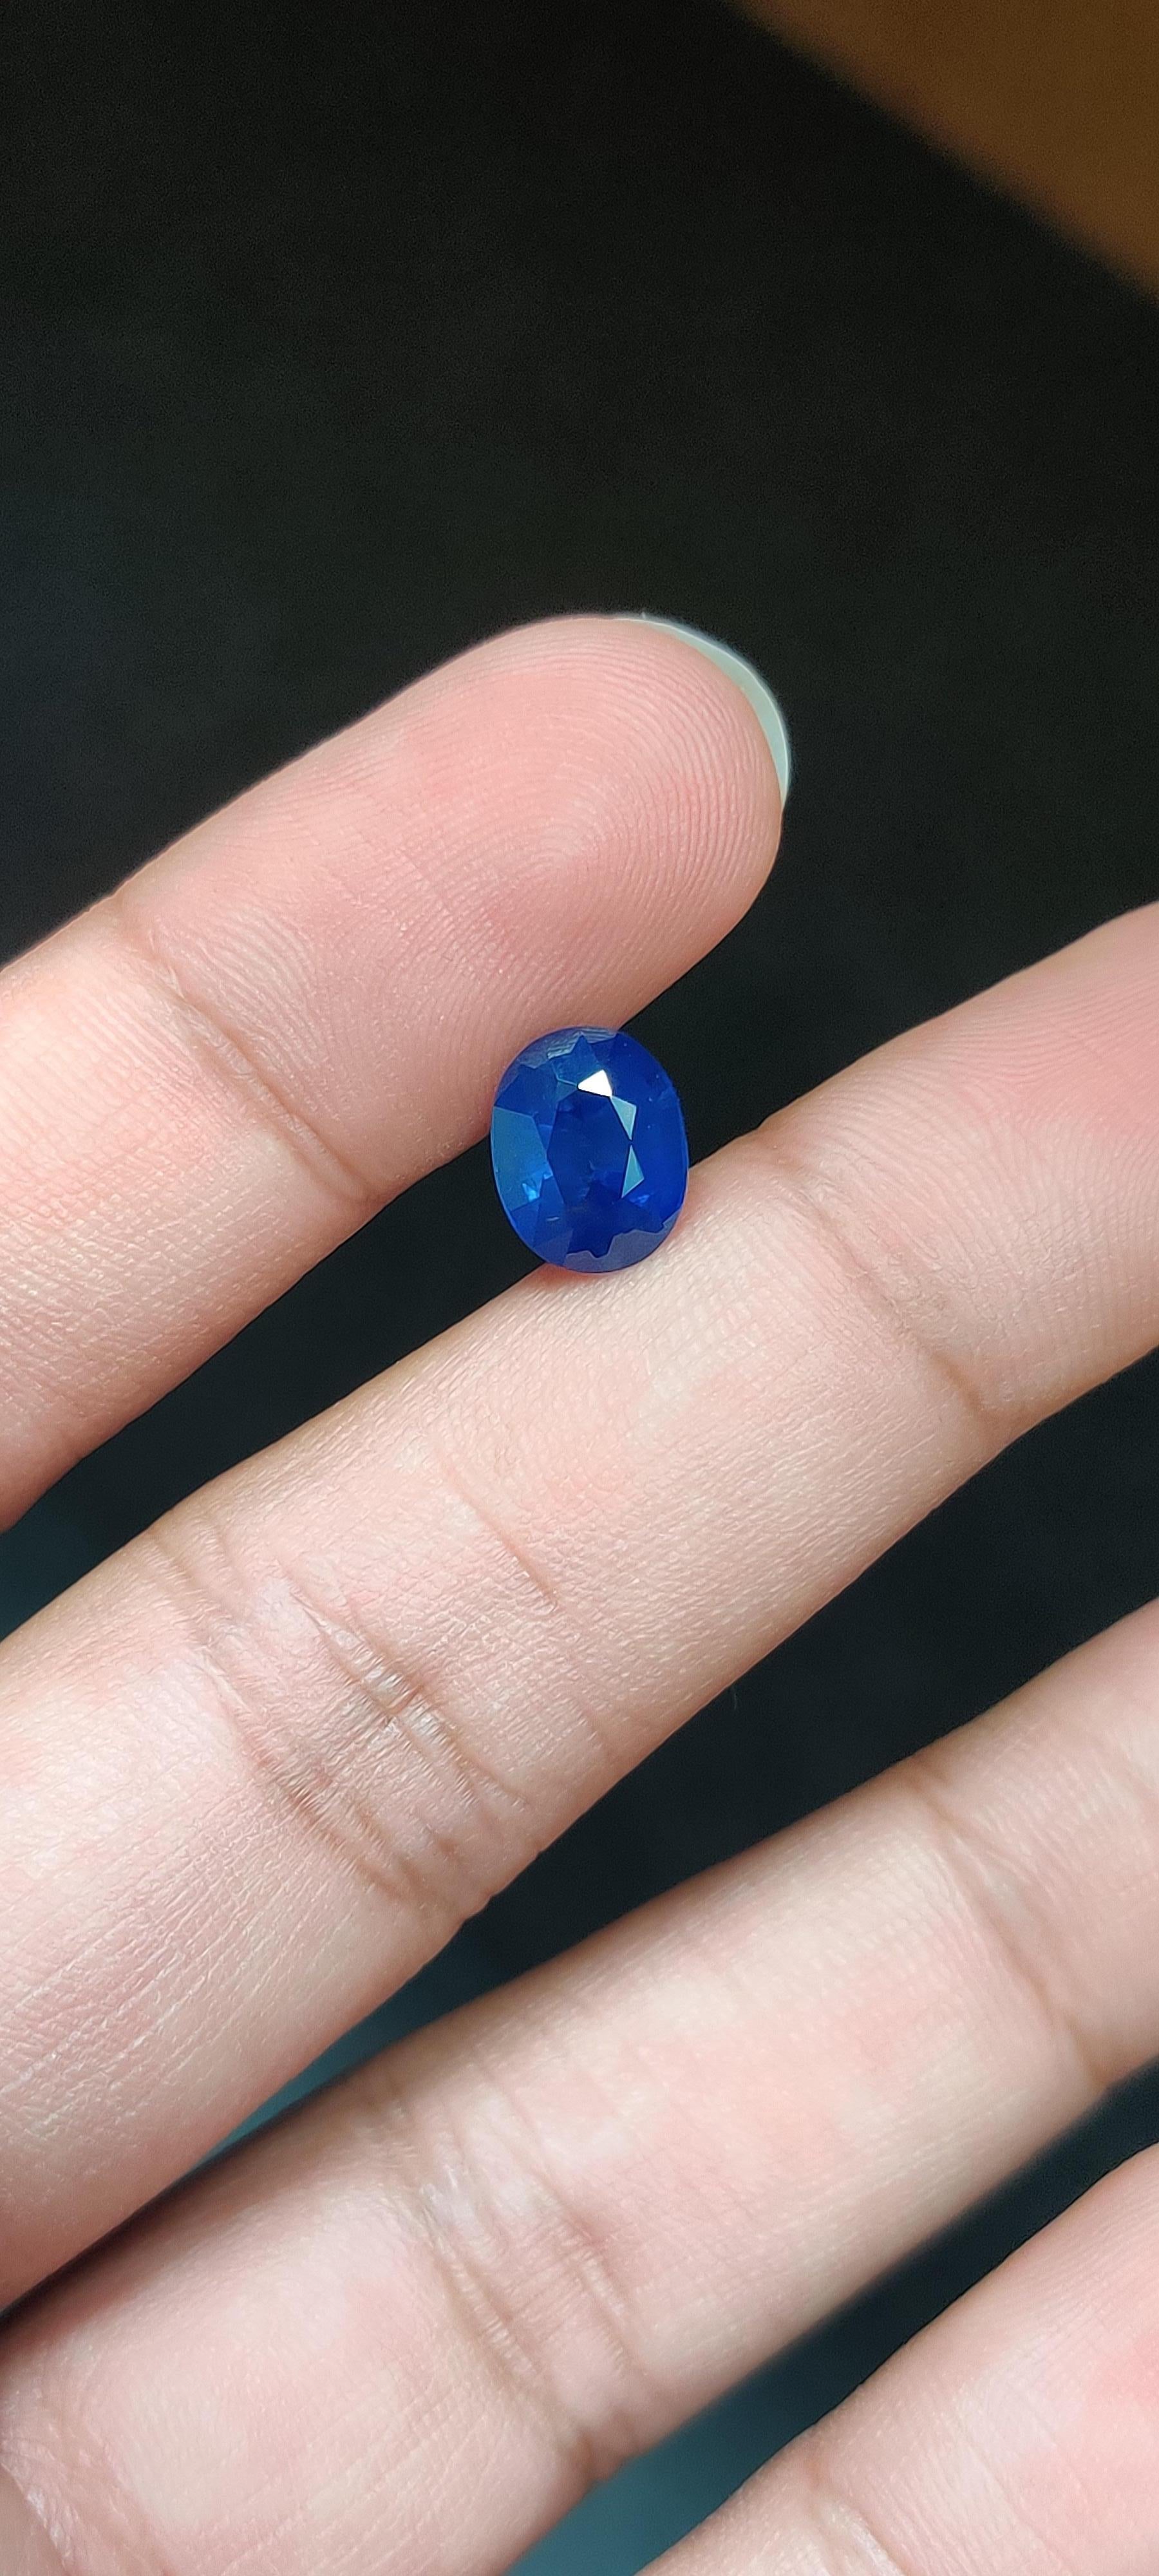 A 4.60 Carat Sapphire, resplendent in a royal blue hue. It hails from the enchanting gem mines of Sri Lanka. This exquisite gem has undergone standard heat treatment only, maintaining its 100% natural origin. The sapphire is cut to perfection in an